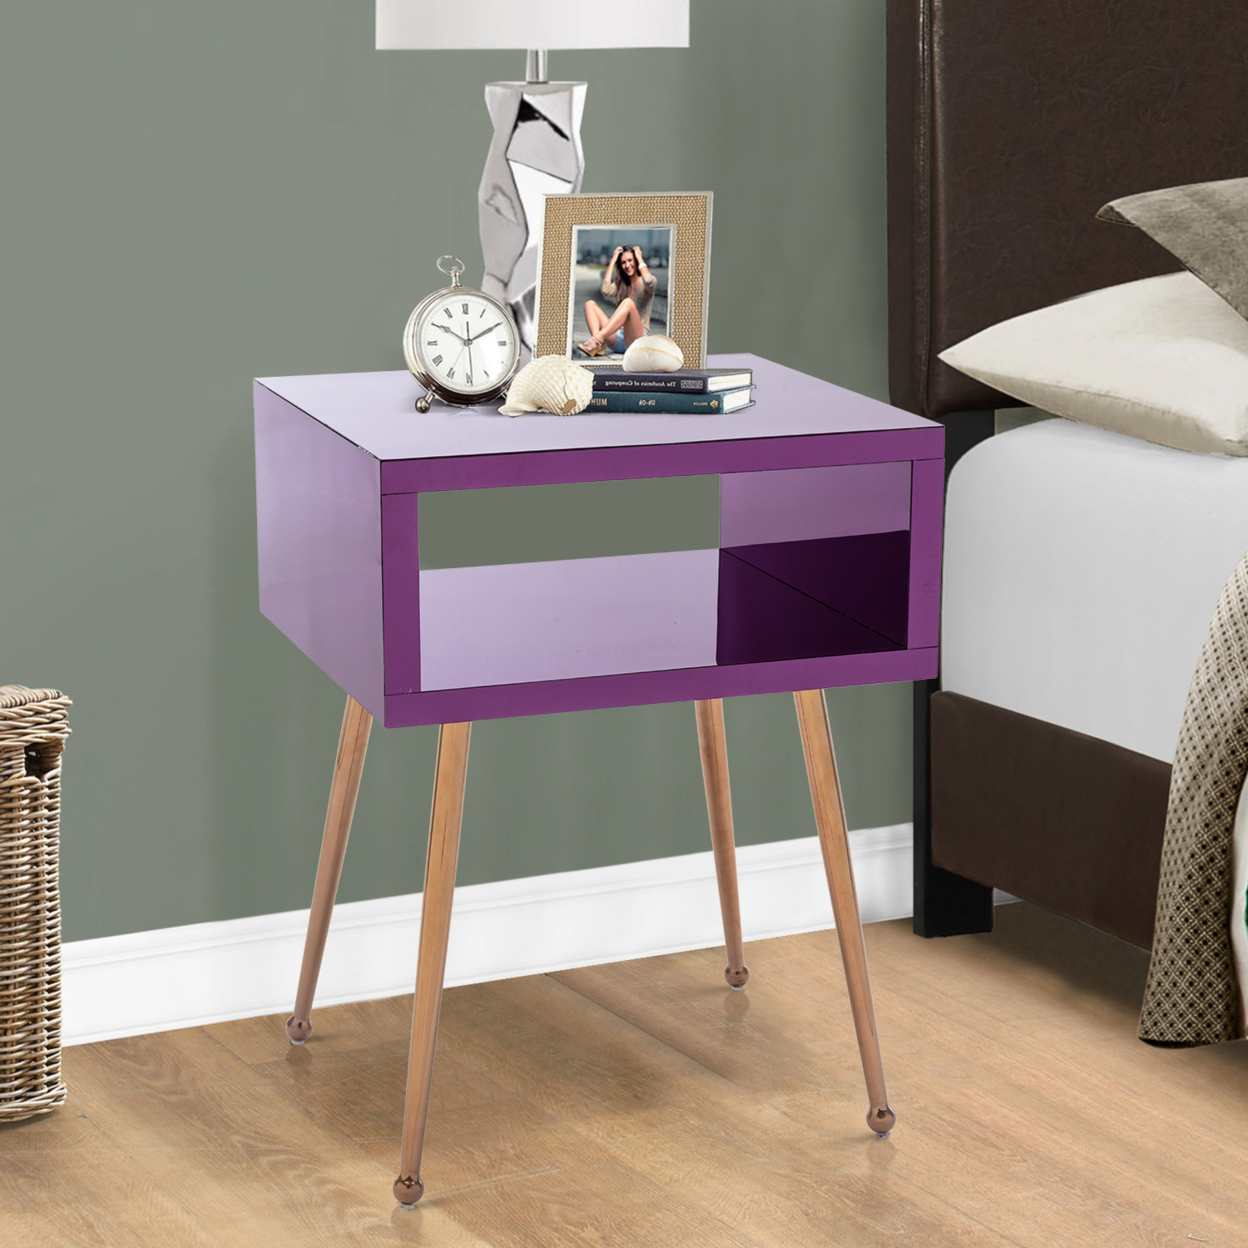 COOLMORE MIRROR END TABLE MIRROR NIGHTSTAND END&SIDE TABLE (Purple color)